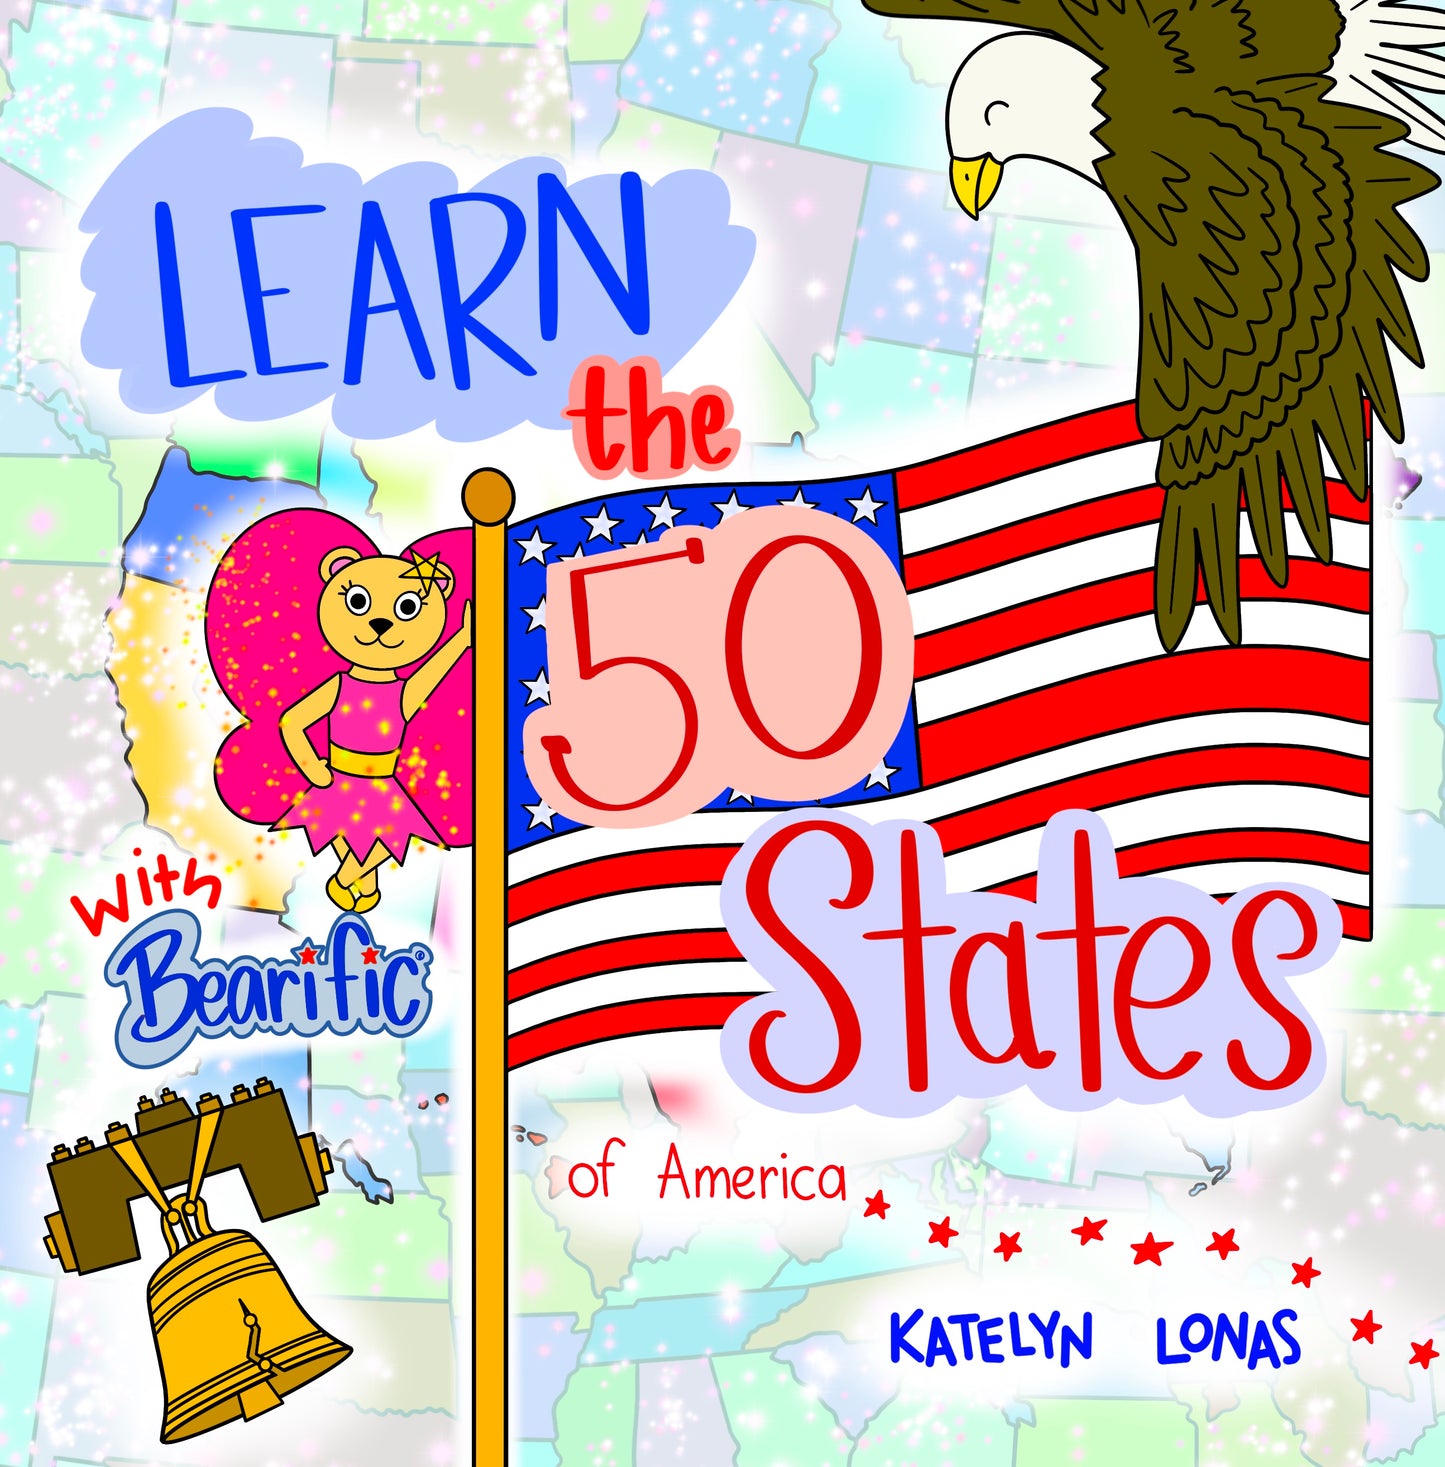 Learn the 50 states of America with Bearific®